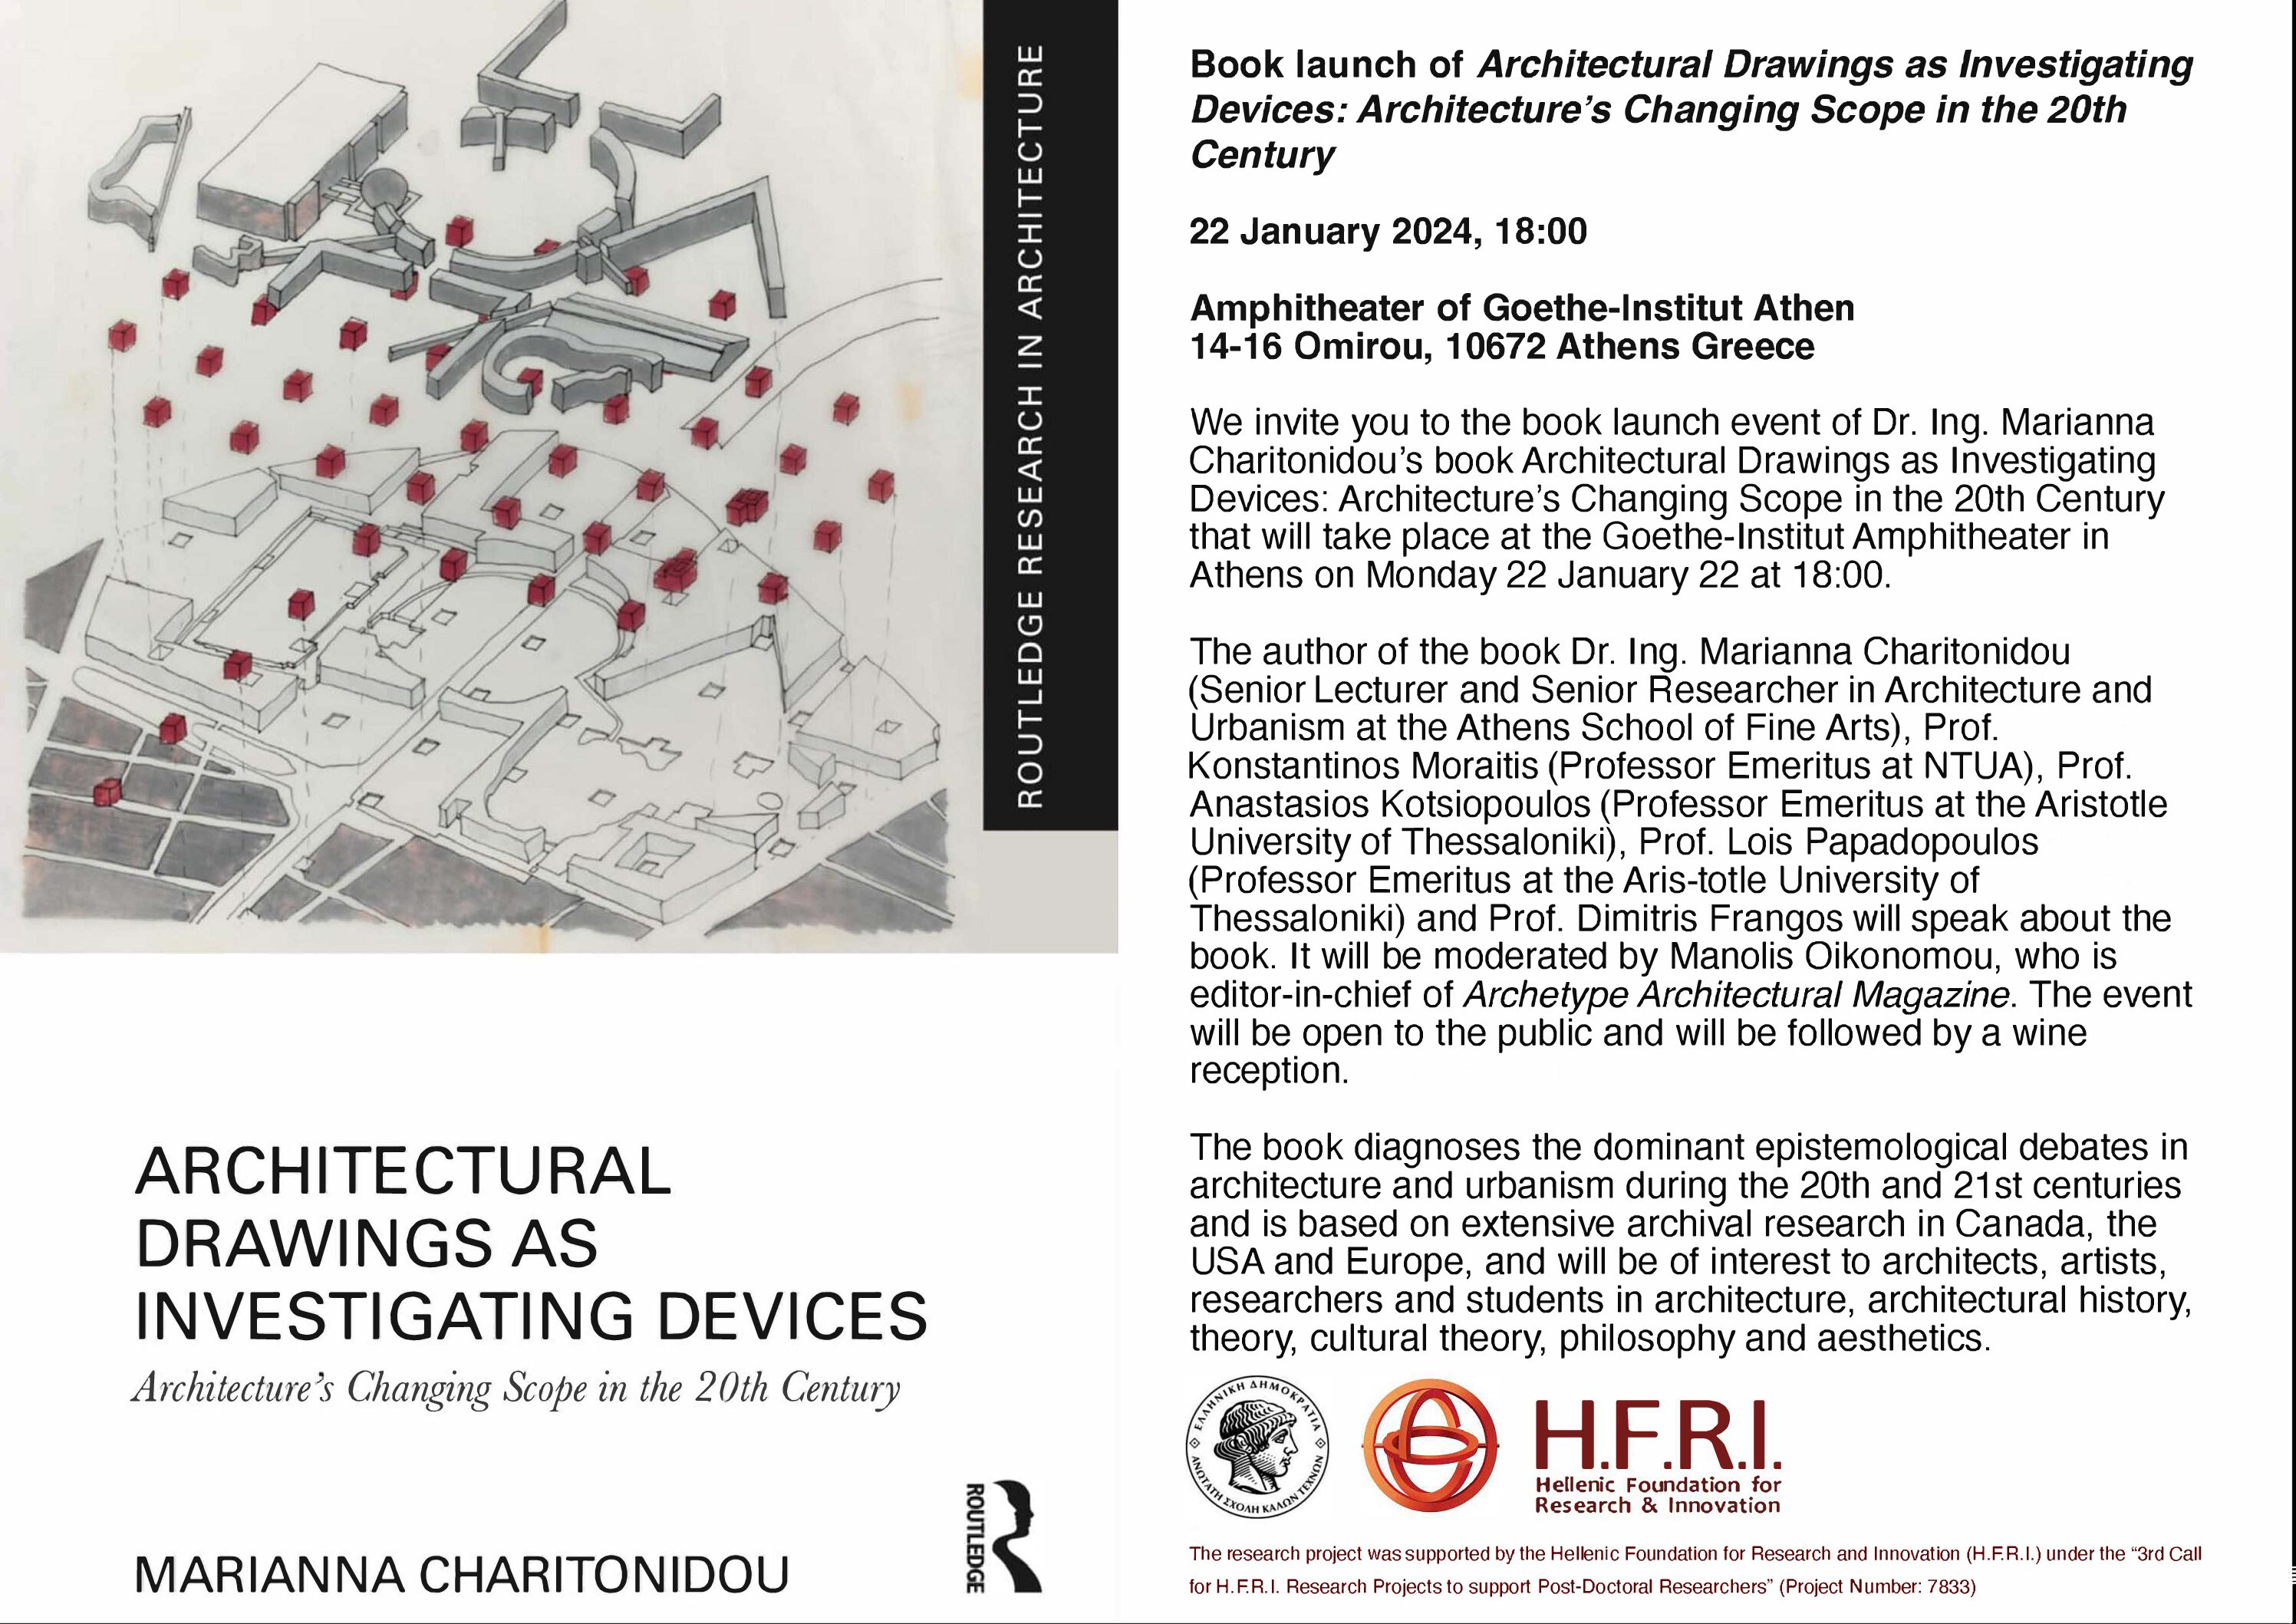 BOOK LAUNCH: Architectural Drawings as Investigating Devices: Architecture’s Changing Scope in the 20th Century